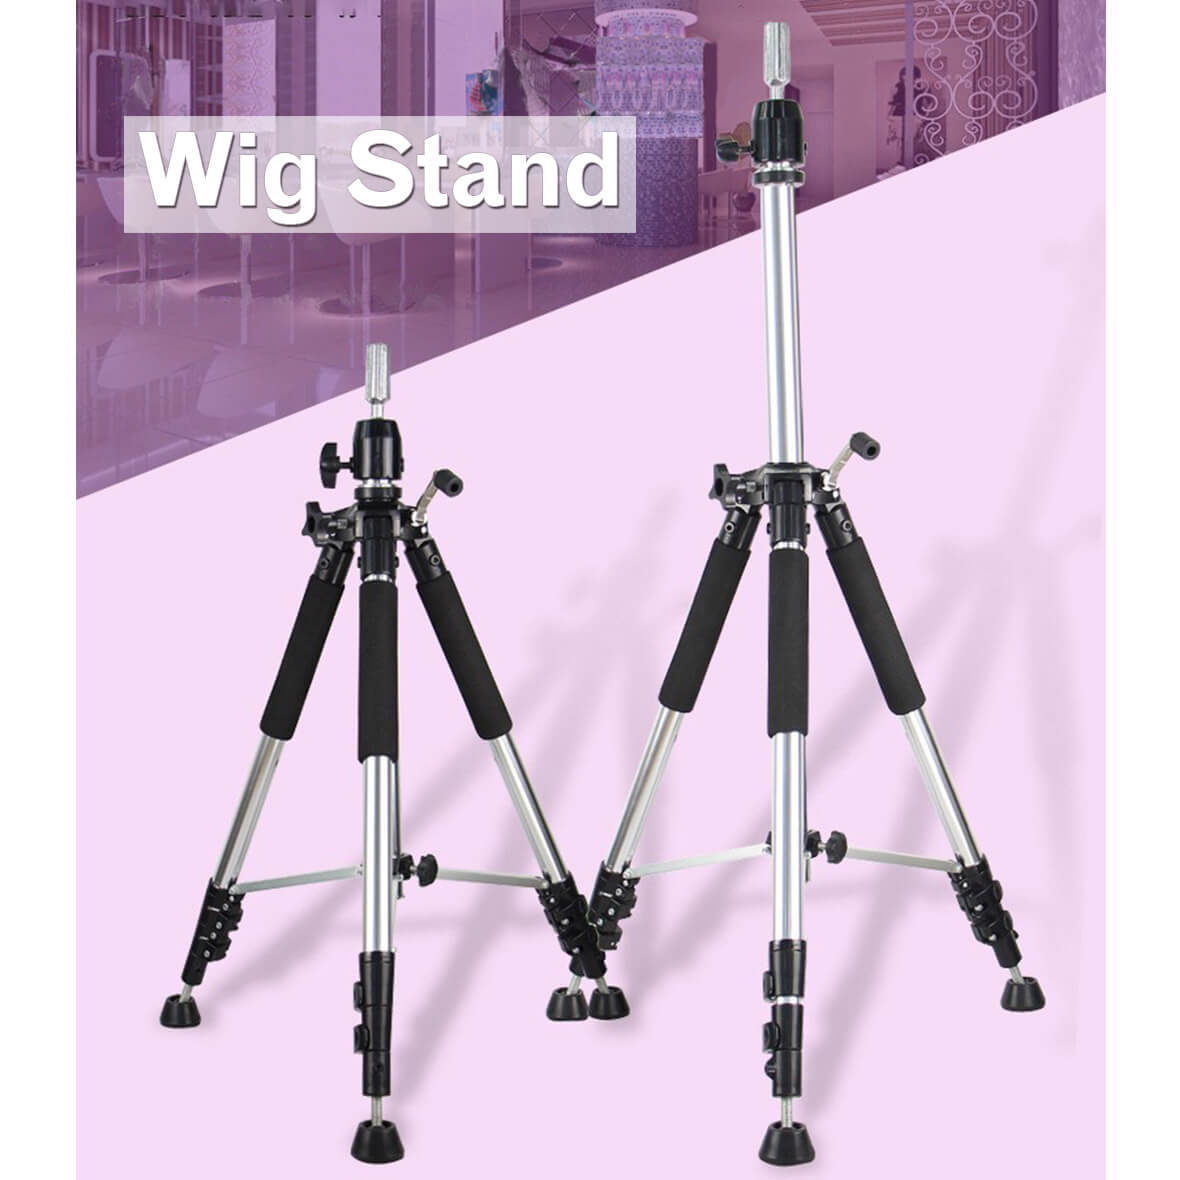 140cm High Tripod Stand for Wig Making Canvas Head Mannequin Head Styling  Practice Training Head Adjustable DIY Wig Accessories - AliExpress